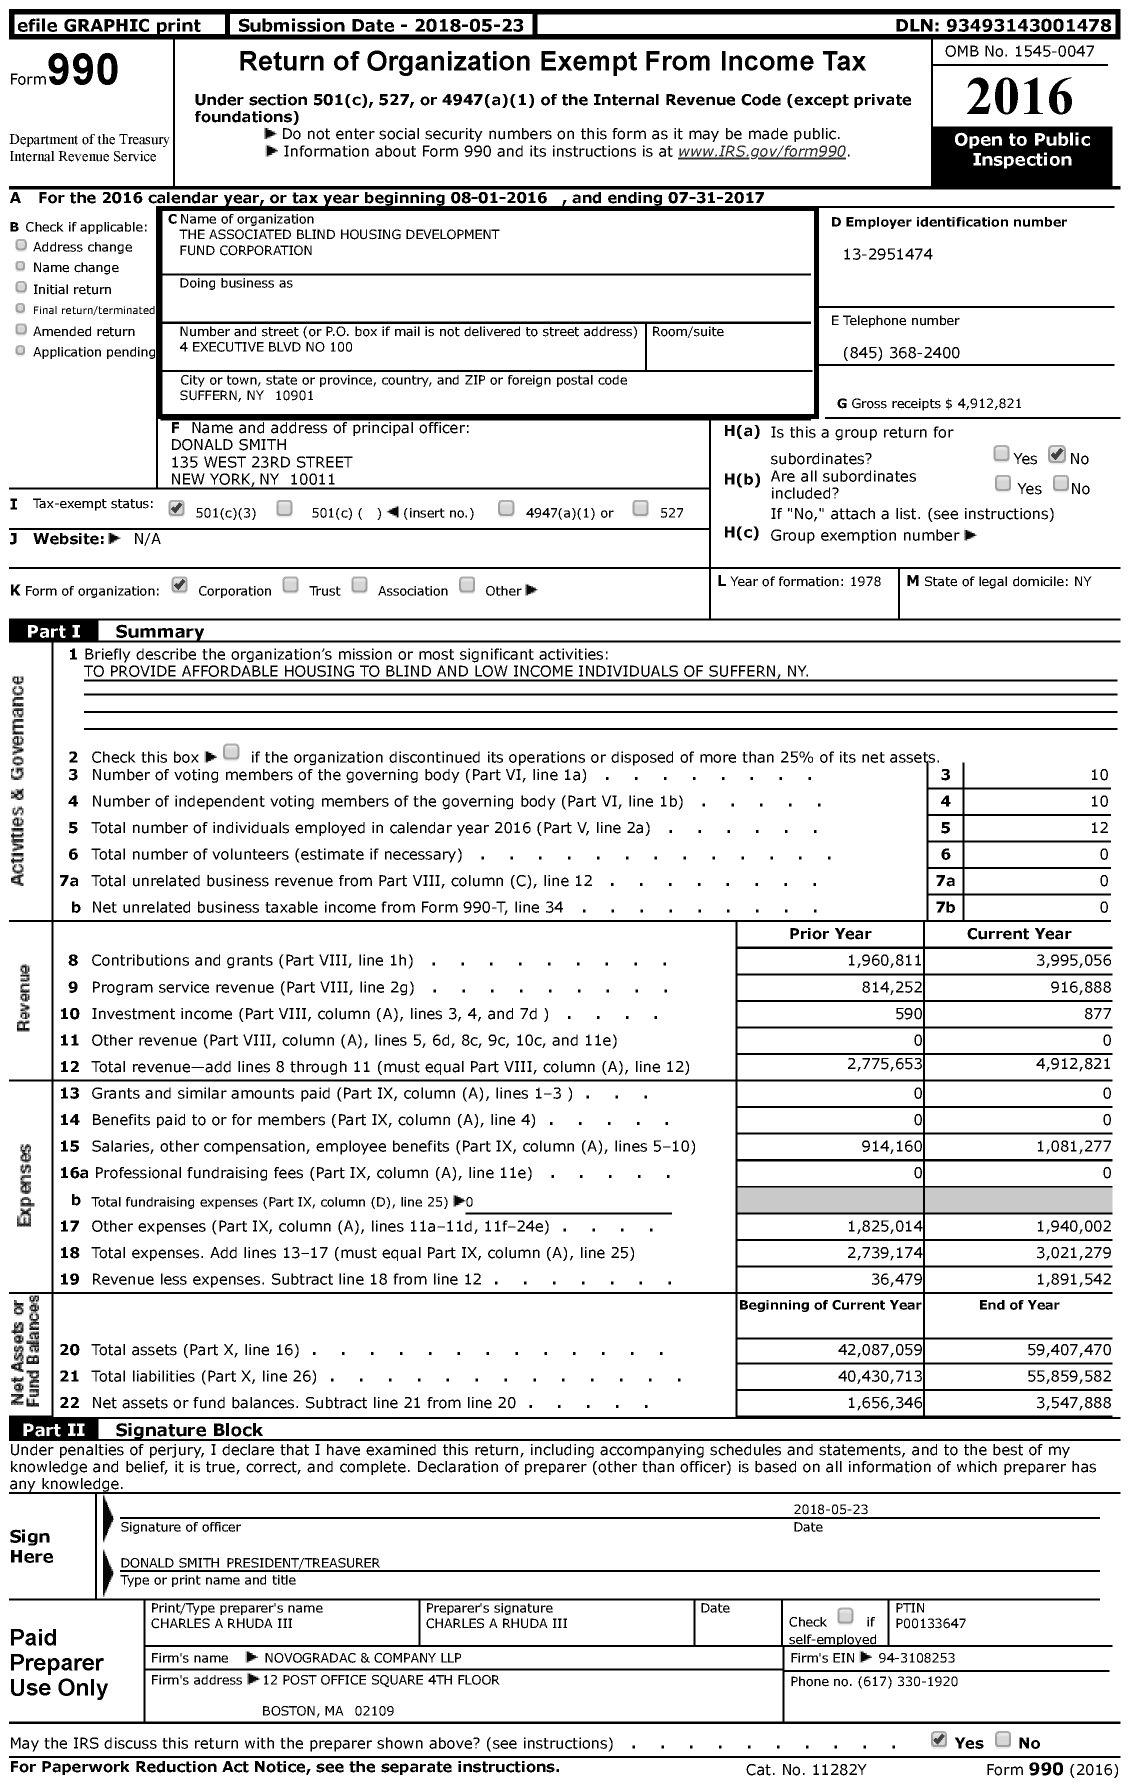 Image of first page of 2016 Form 990 for The Associated Blind Housing Development Fund Corporation